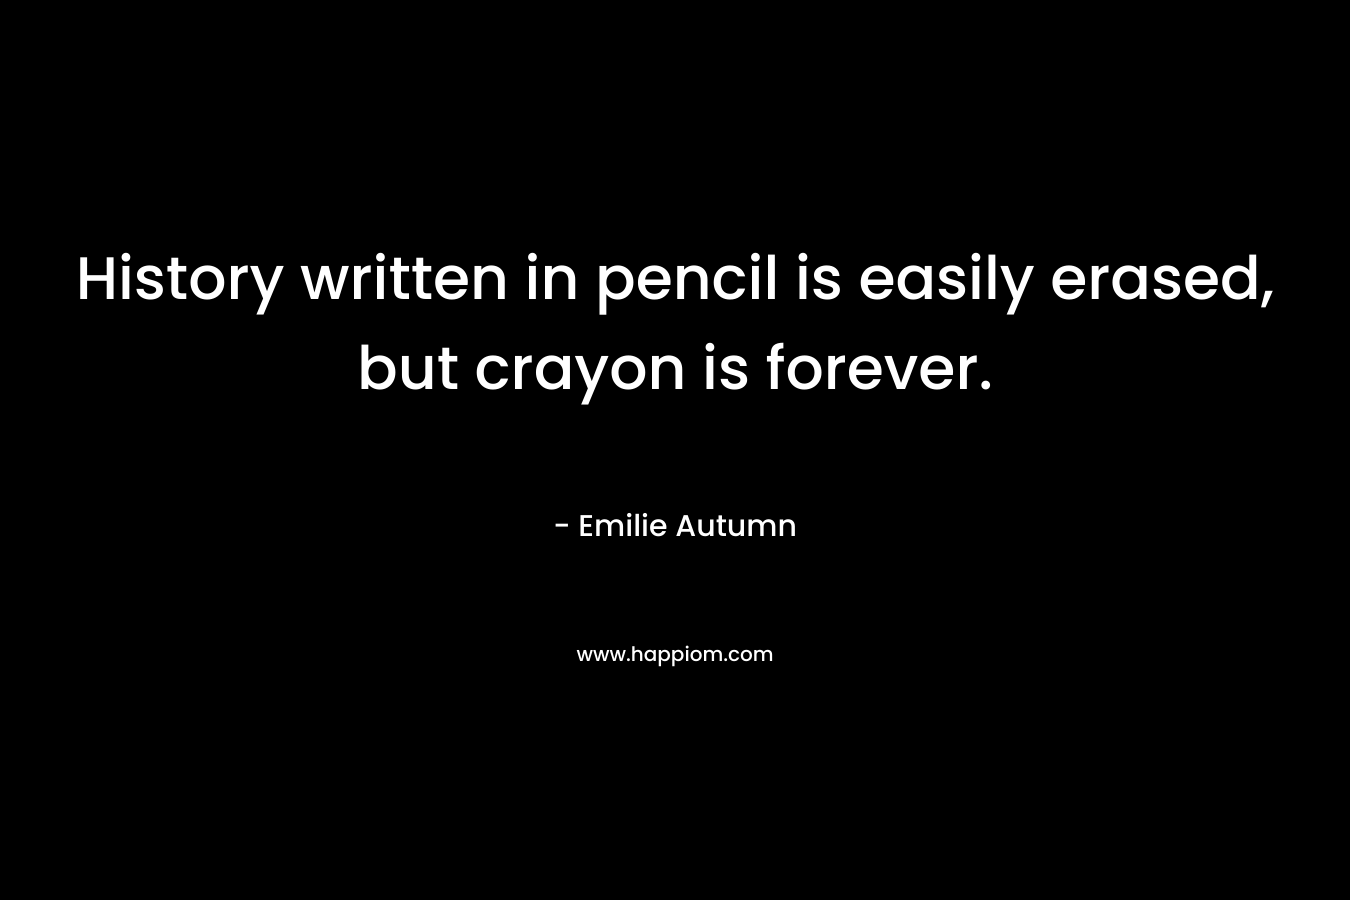 History written in pencil is easily erased, but crayon is forever. – Emilie Autumn